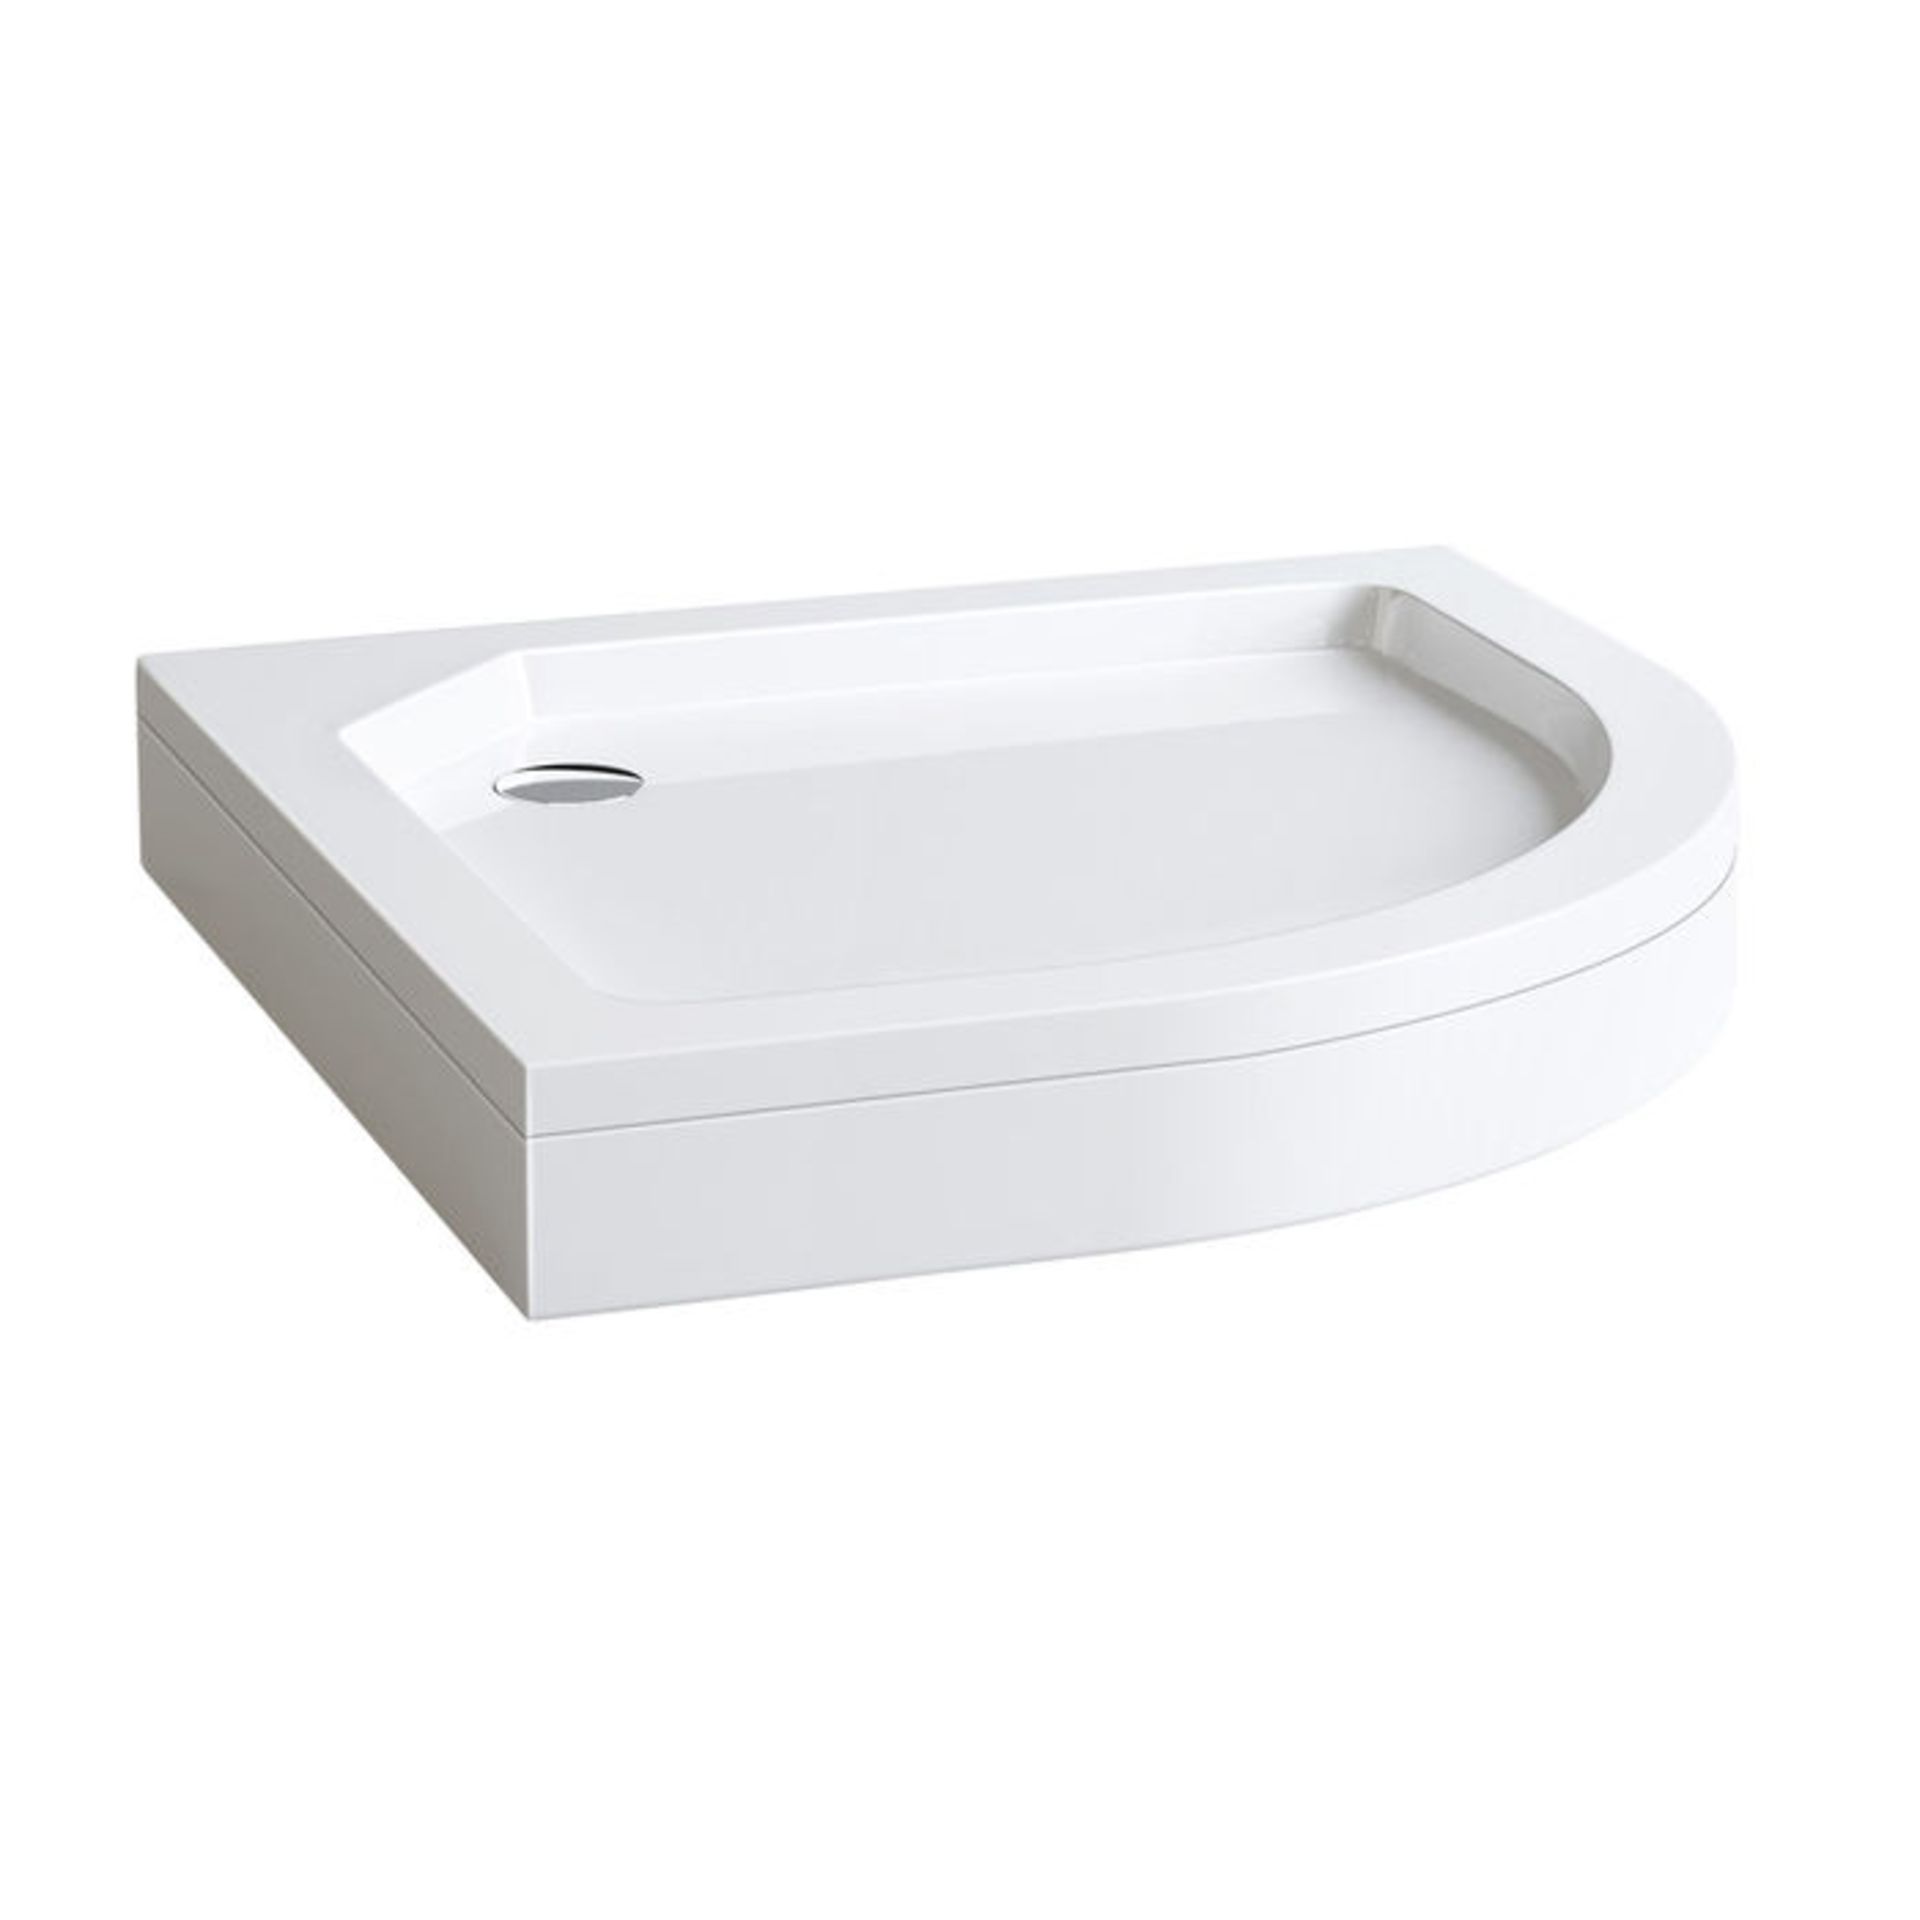 (TA95) 900x900mm Quadrant Easy Plumb Shower Tray. Easy to clean waste container Made from reinforced - Image 2 of 2